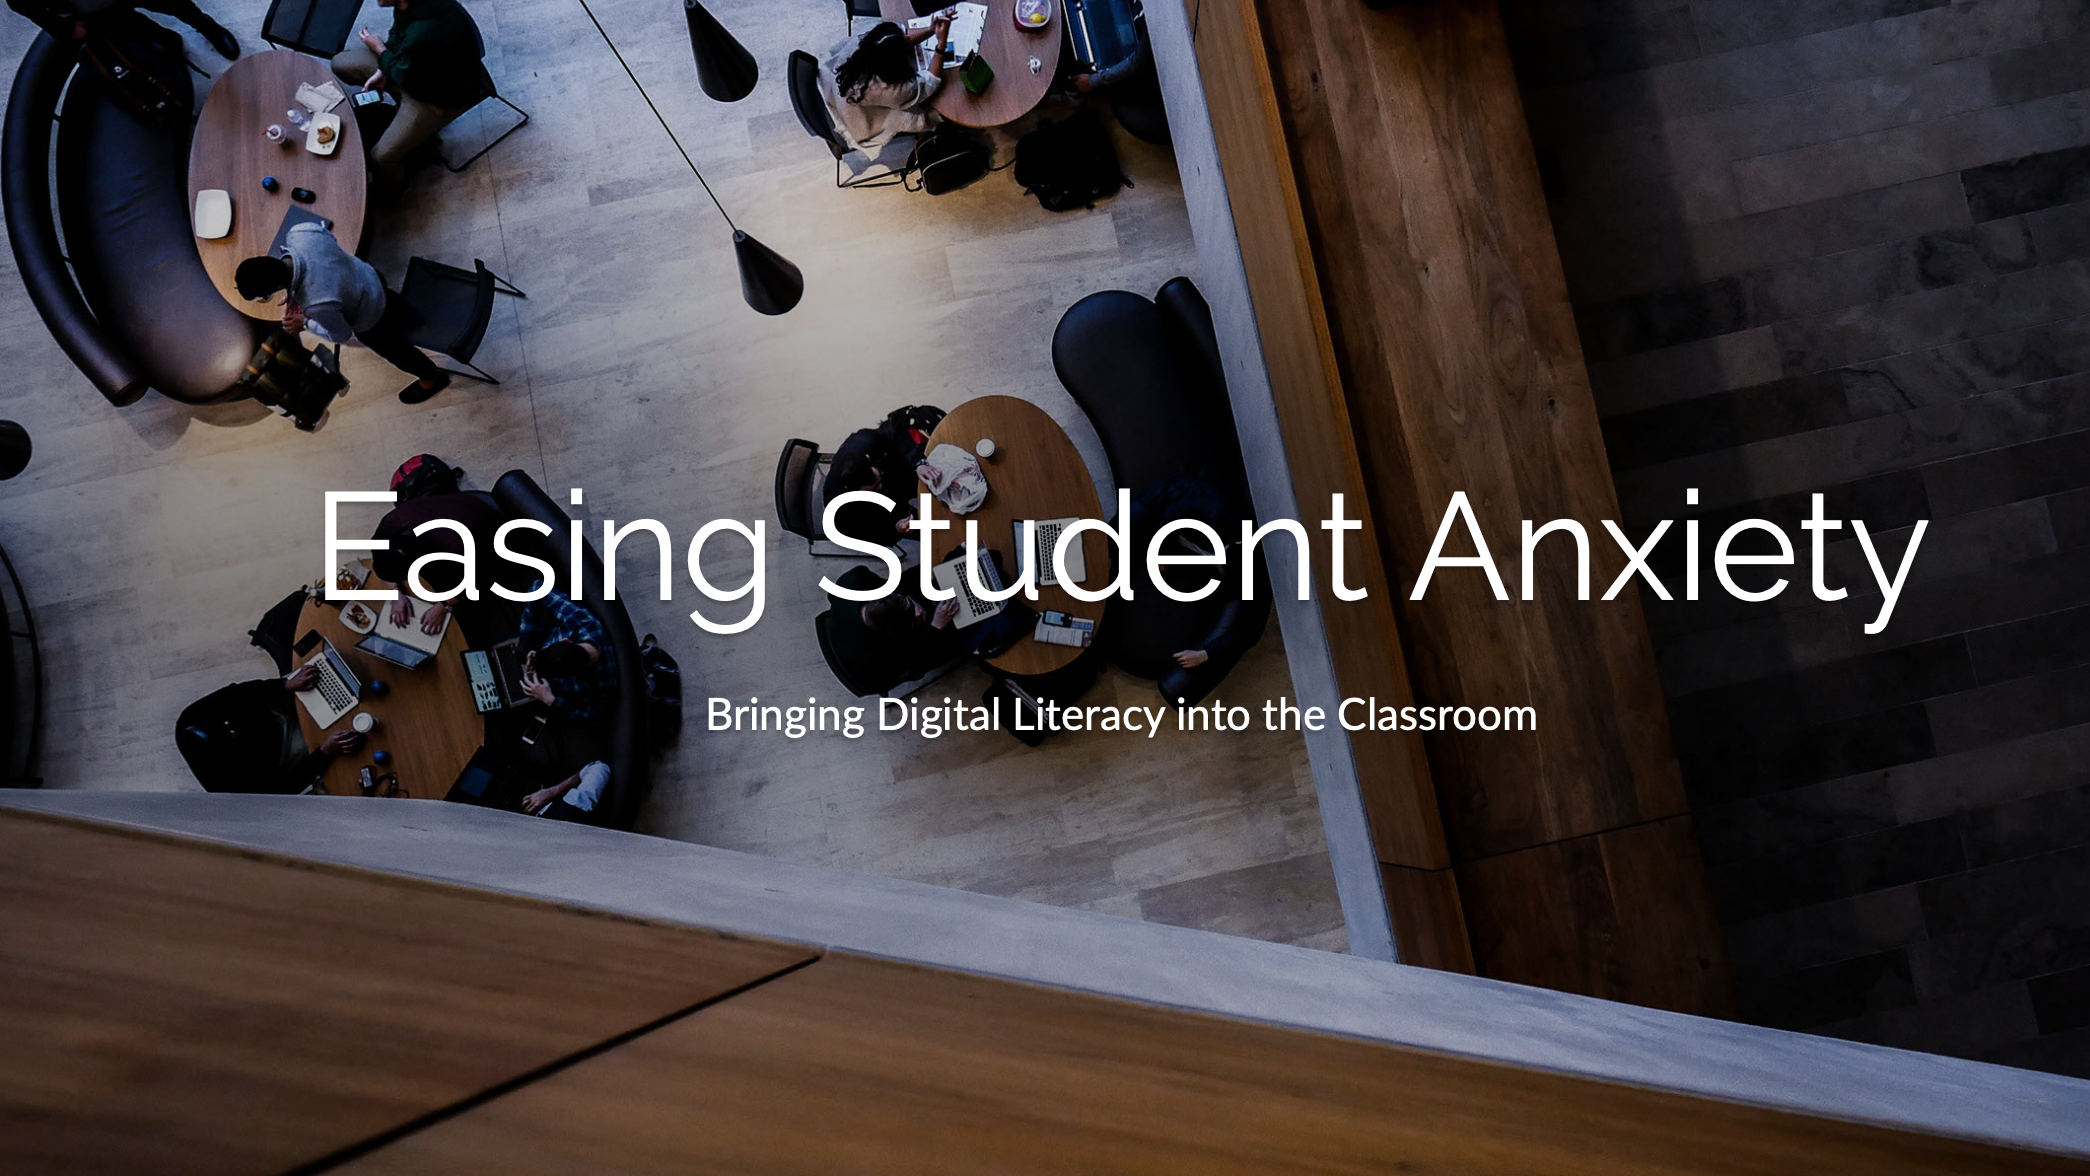 Overhead image of a campus student work area with a large title in the center, "Easing Student Anxiety" and a subtitle "Bringing Digital Literacy into the Classroom."